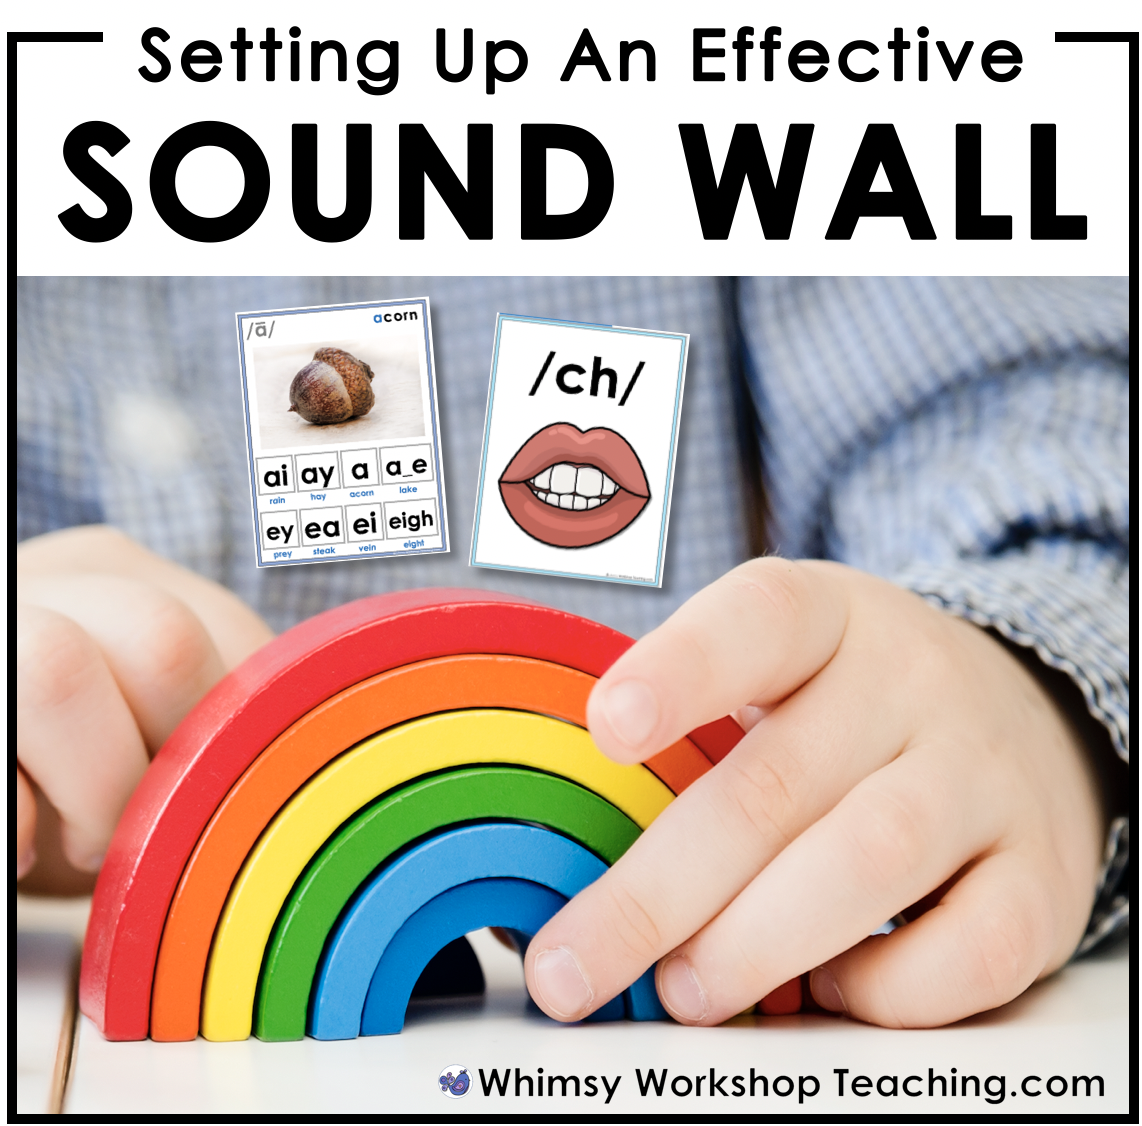 Setting Up A Sound Wall - Whimsy Workshop Teaching